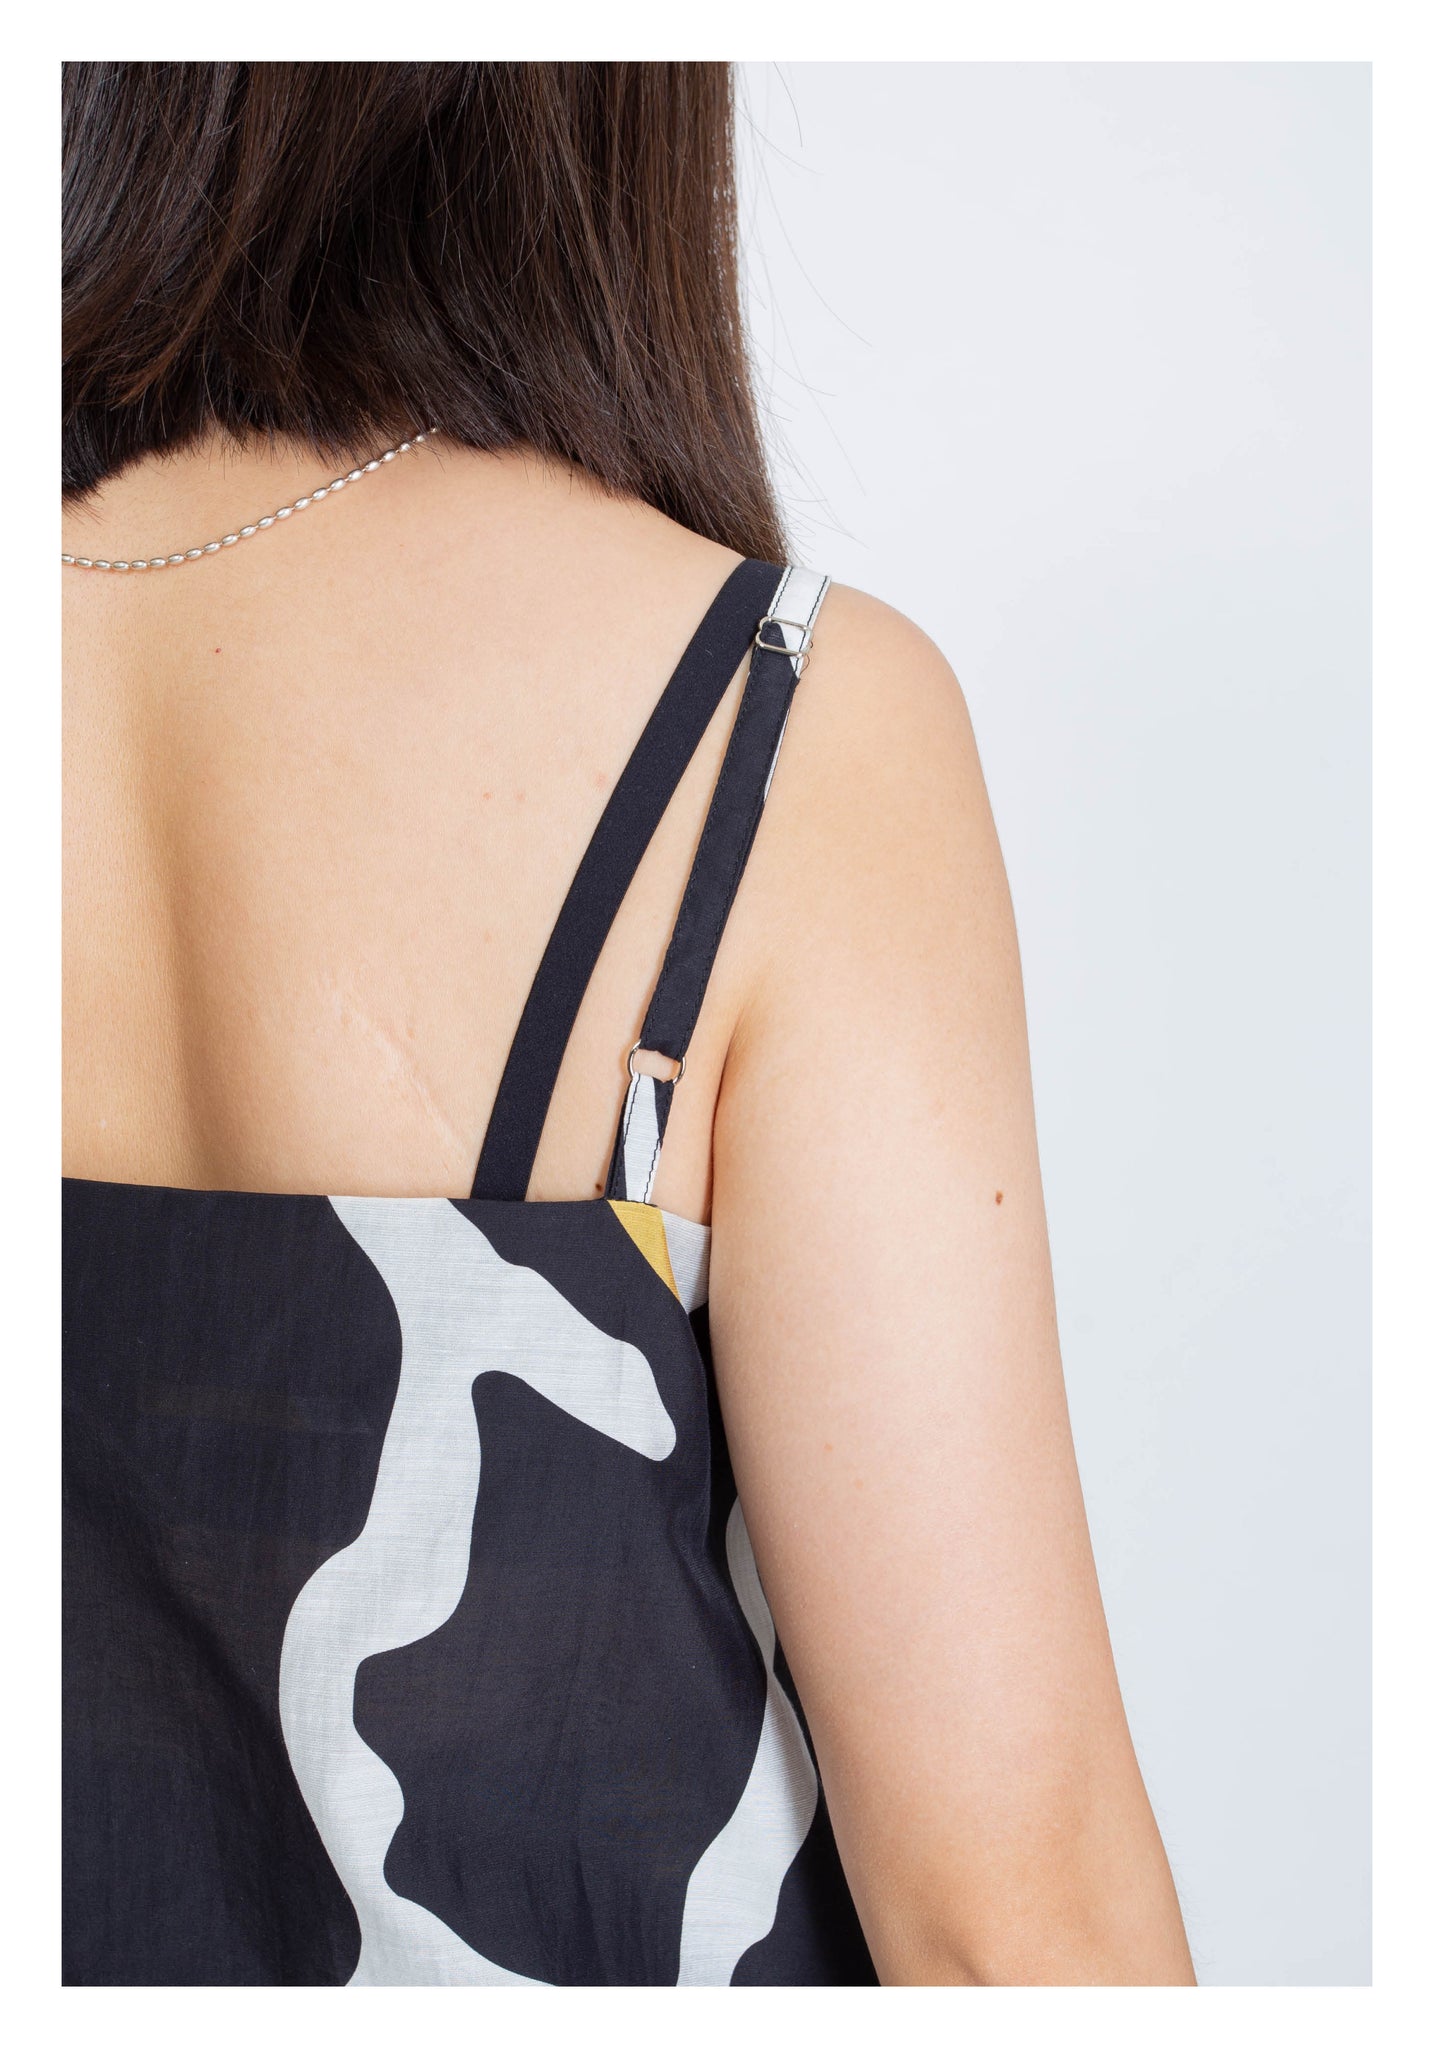 Abstract Pattern Ruffle Camisole - whoami